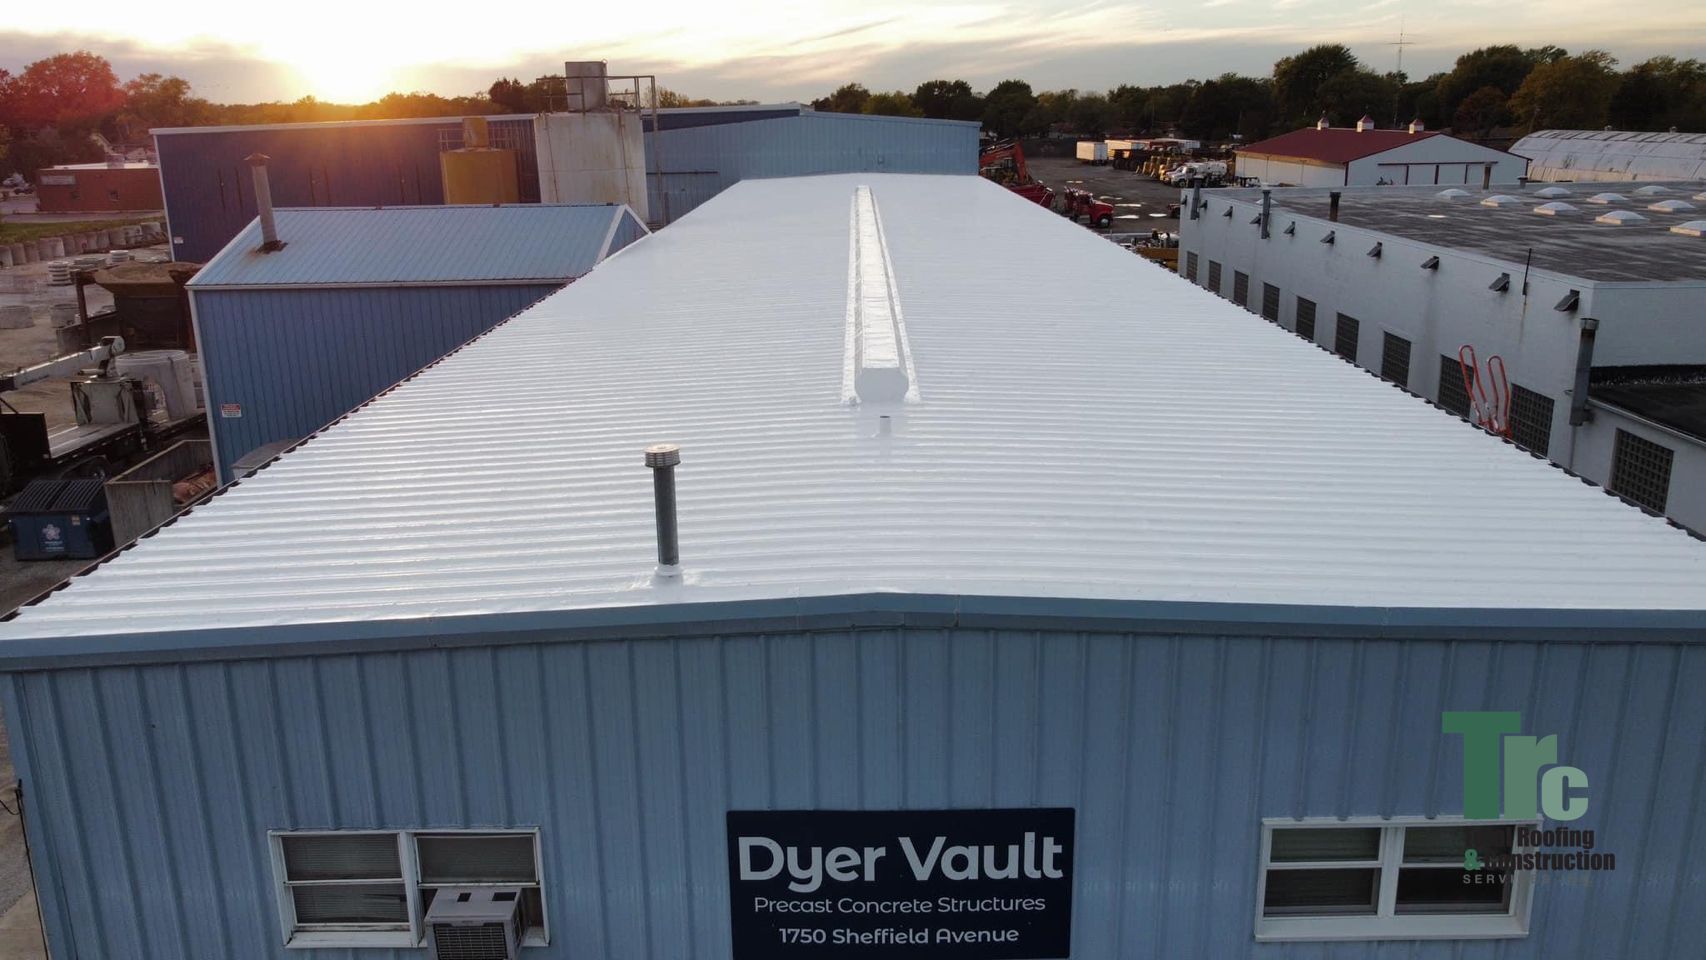 We installed the Tri-built roof coating product on this metal facility. 